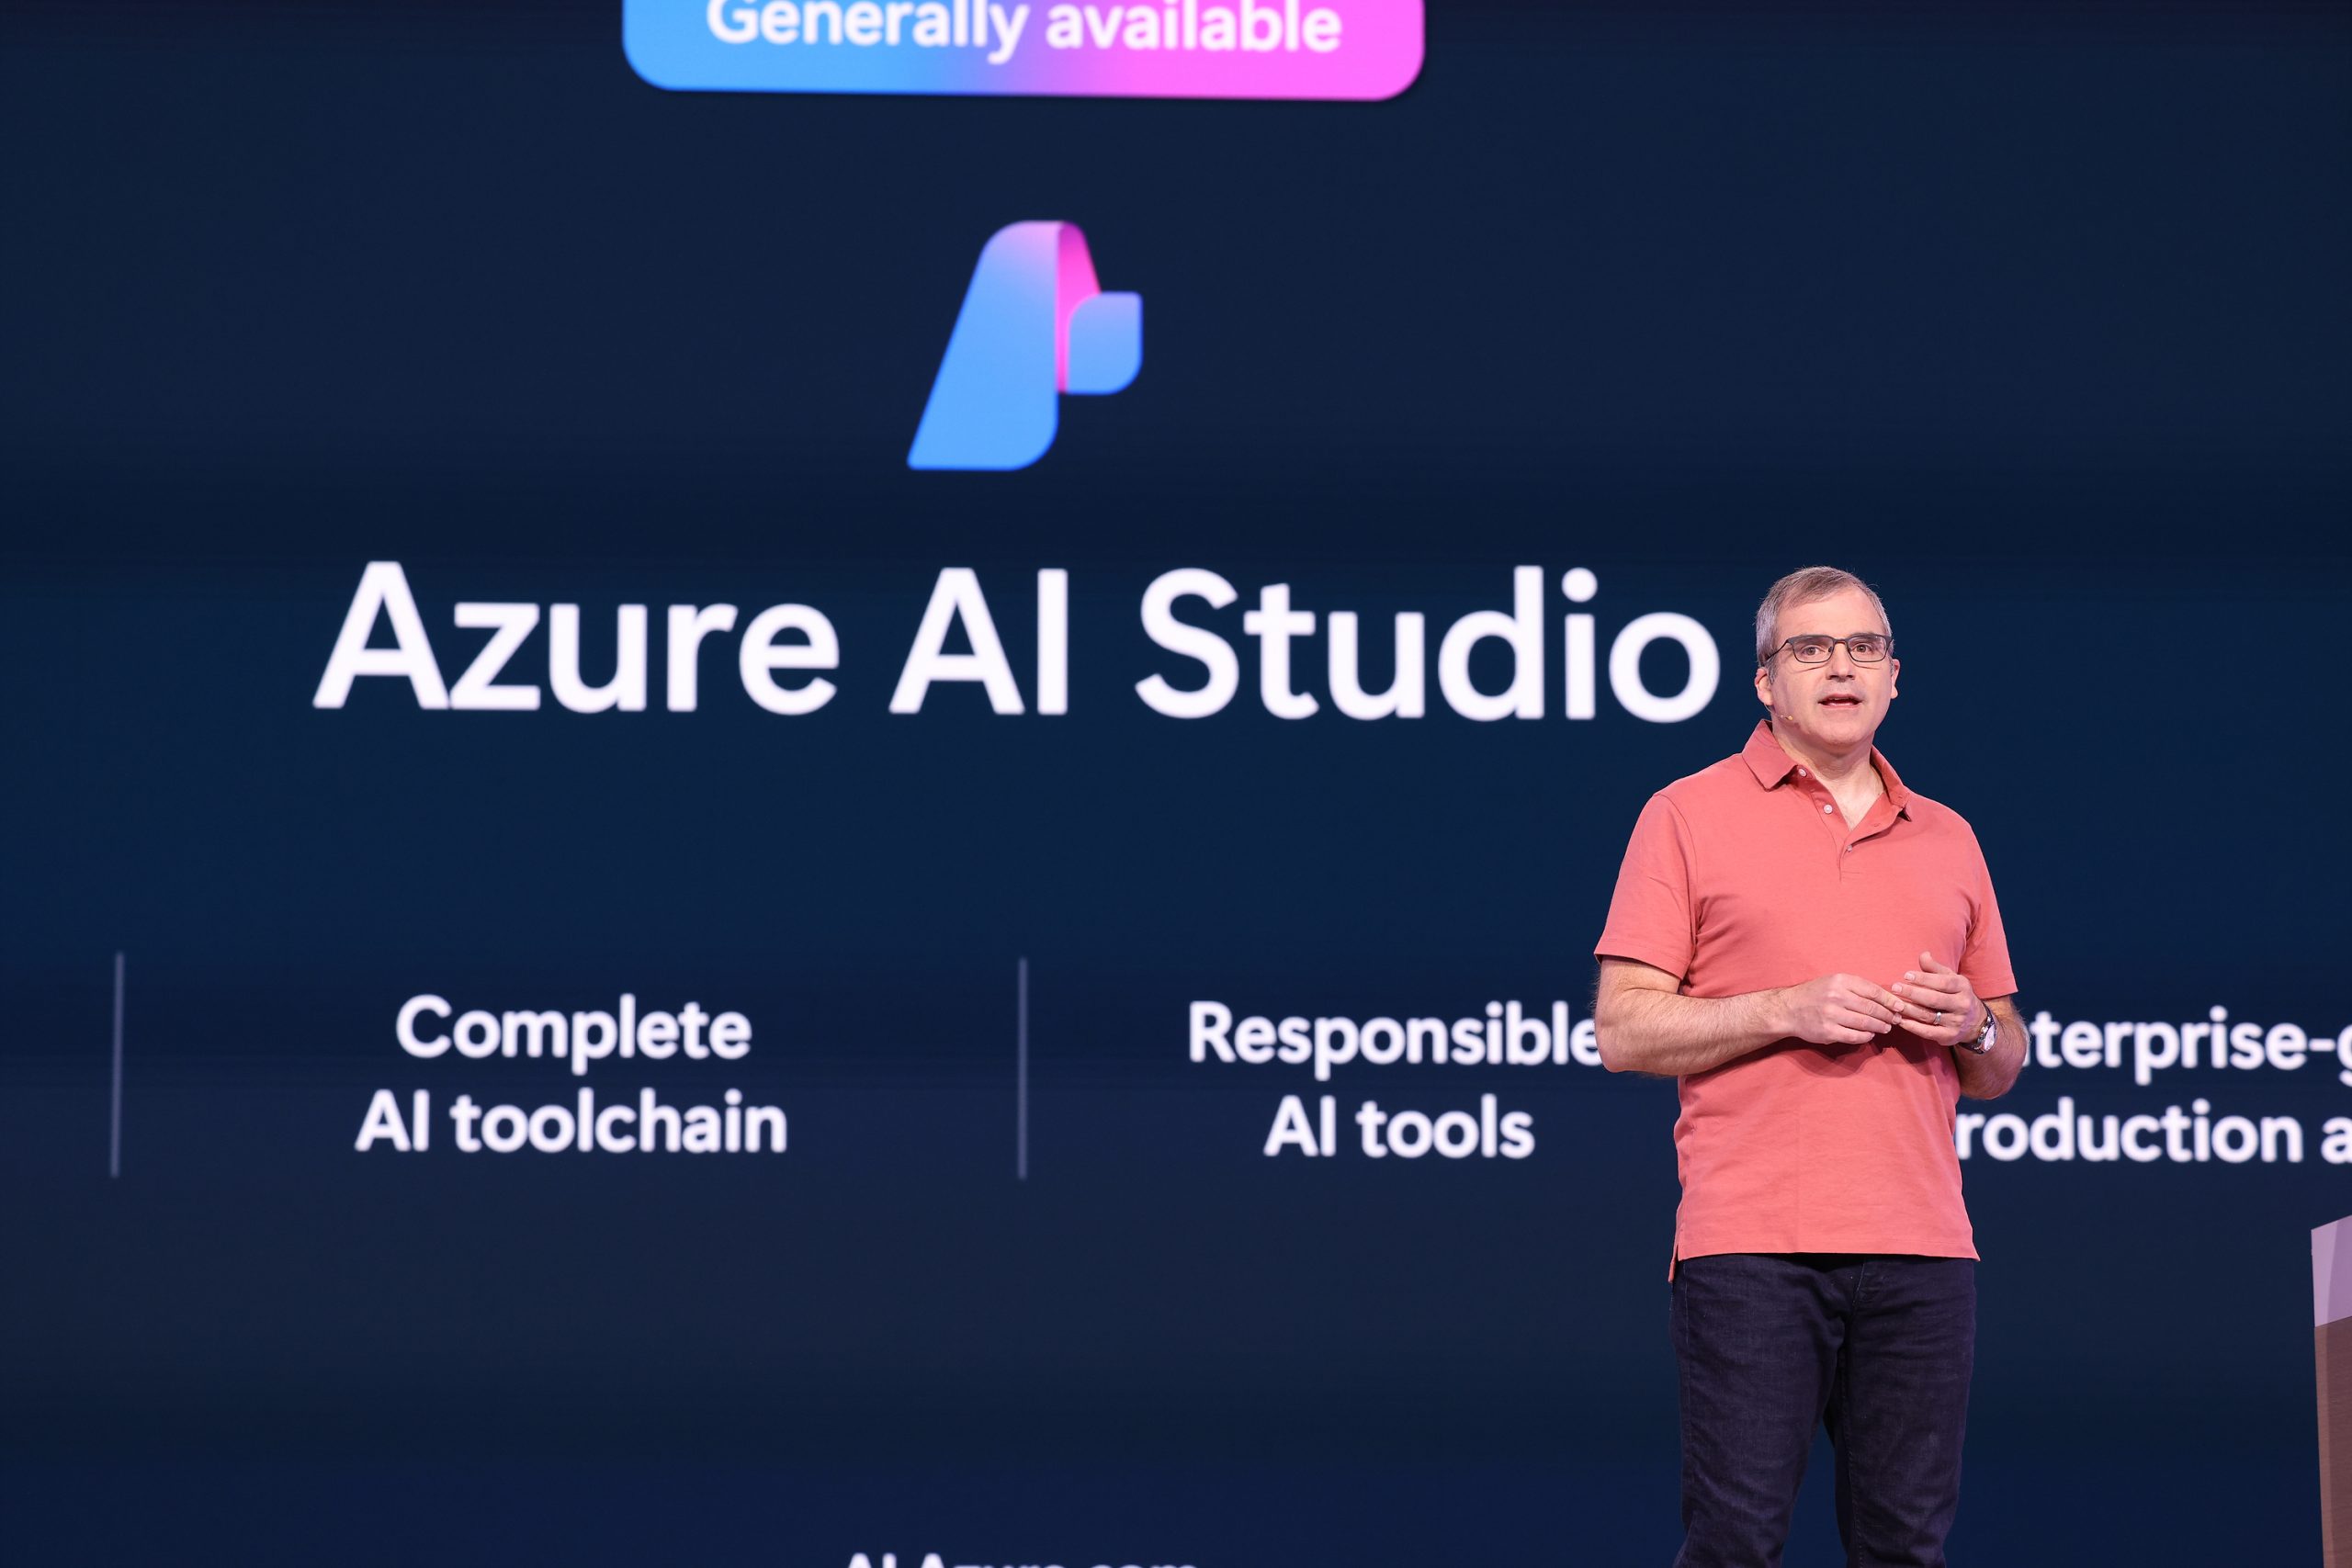 A man standing on stage speaking to an audience with text about Azure AI Studio on a screen behind him